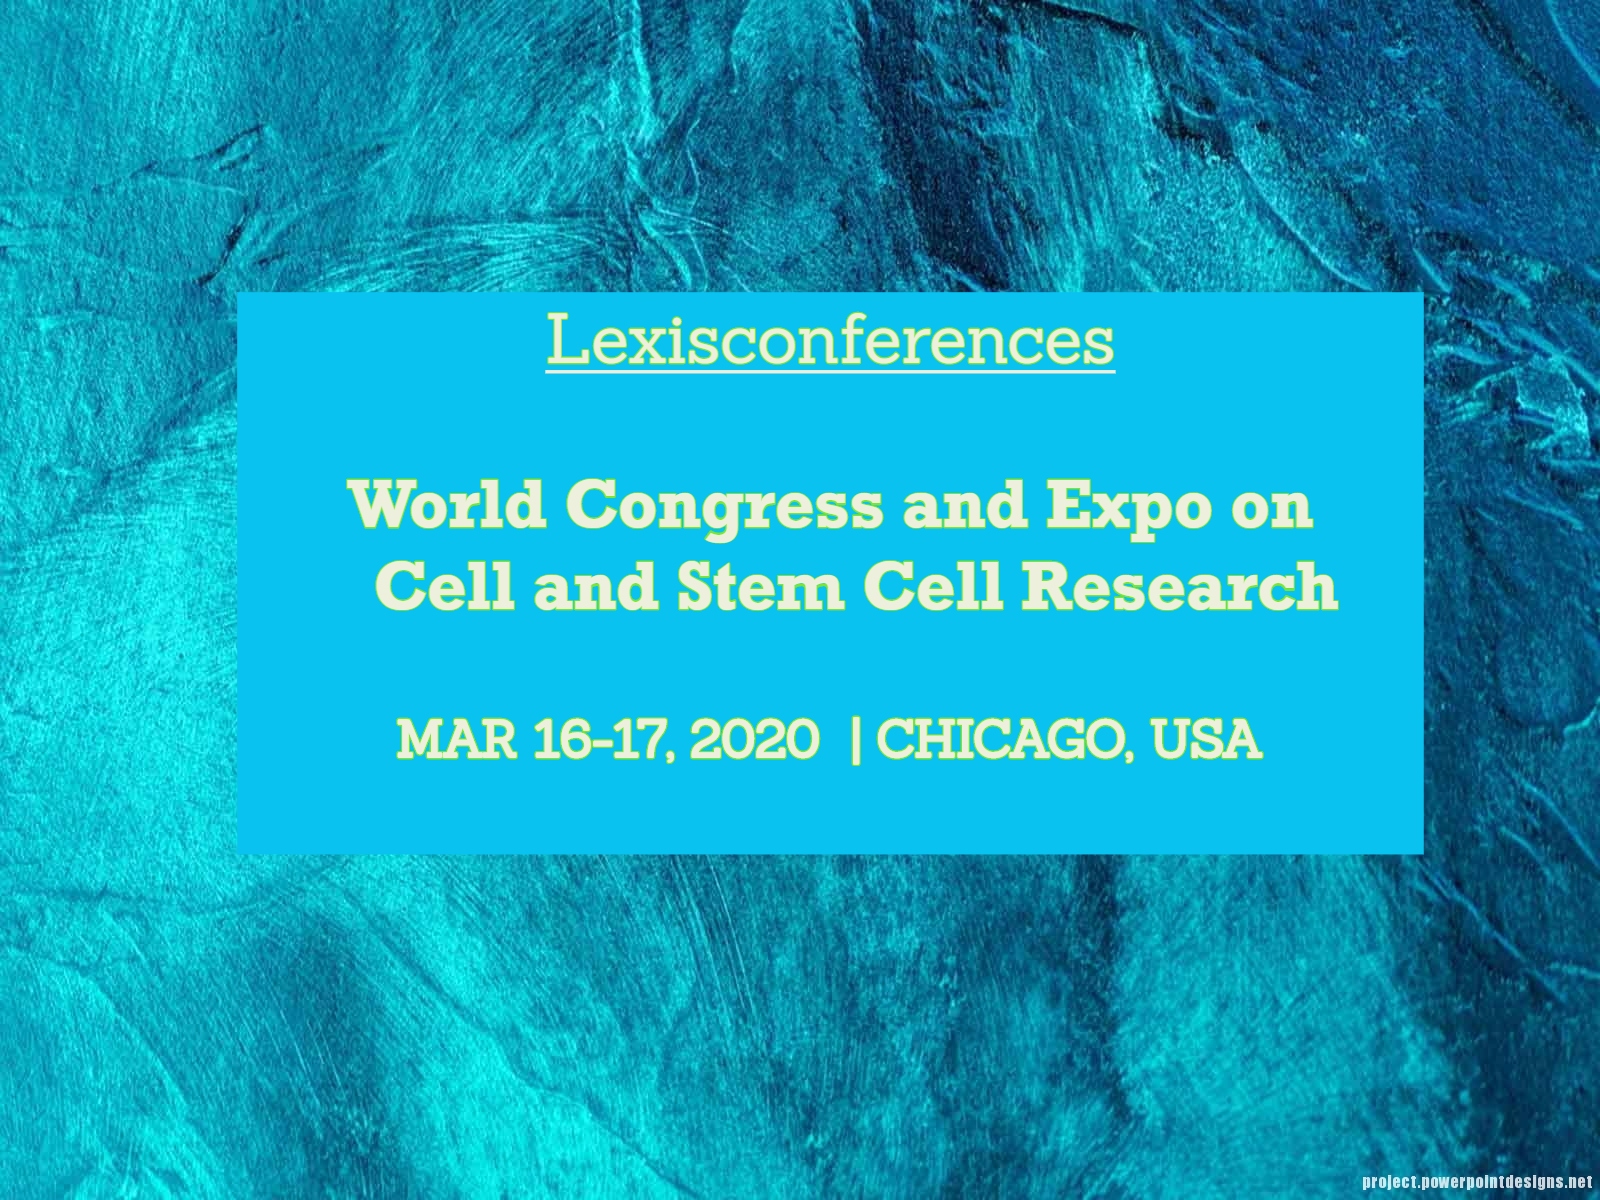 World Congress and Expo on Cell and Stem Cell Research